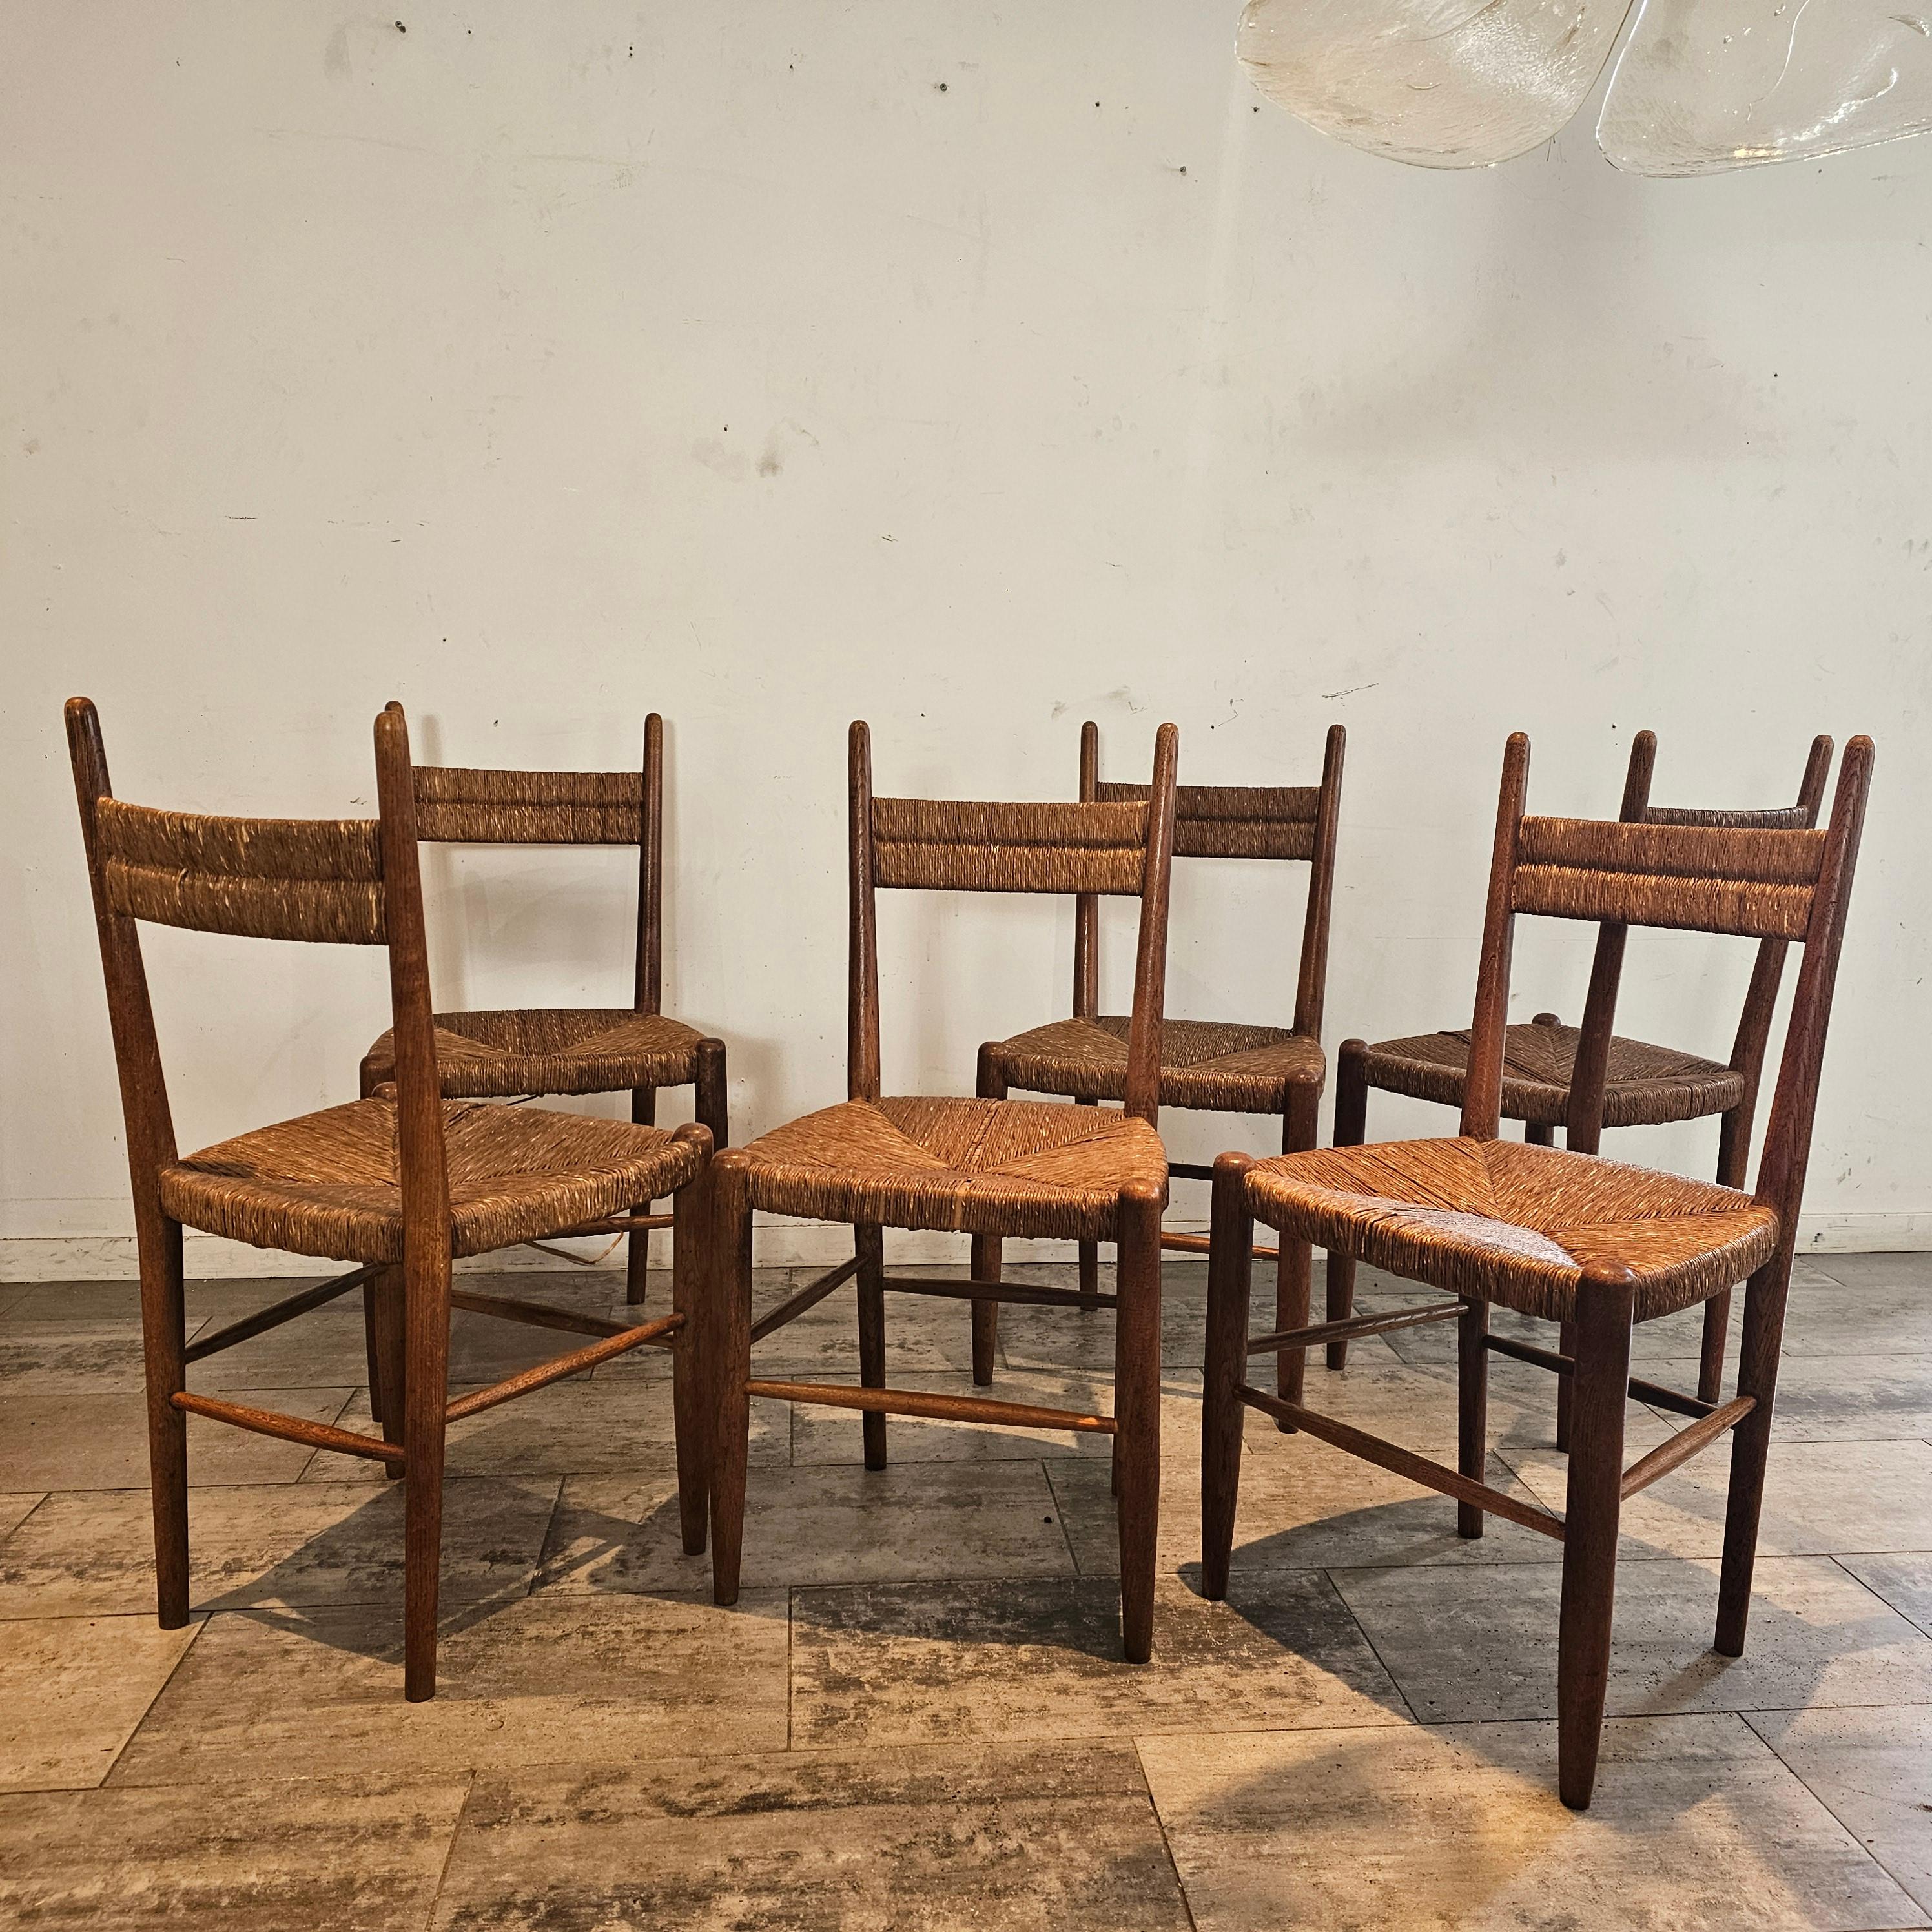 Hand-Woven Set of 6 French Chairs in Teak and straw Woven Seatings For Sale